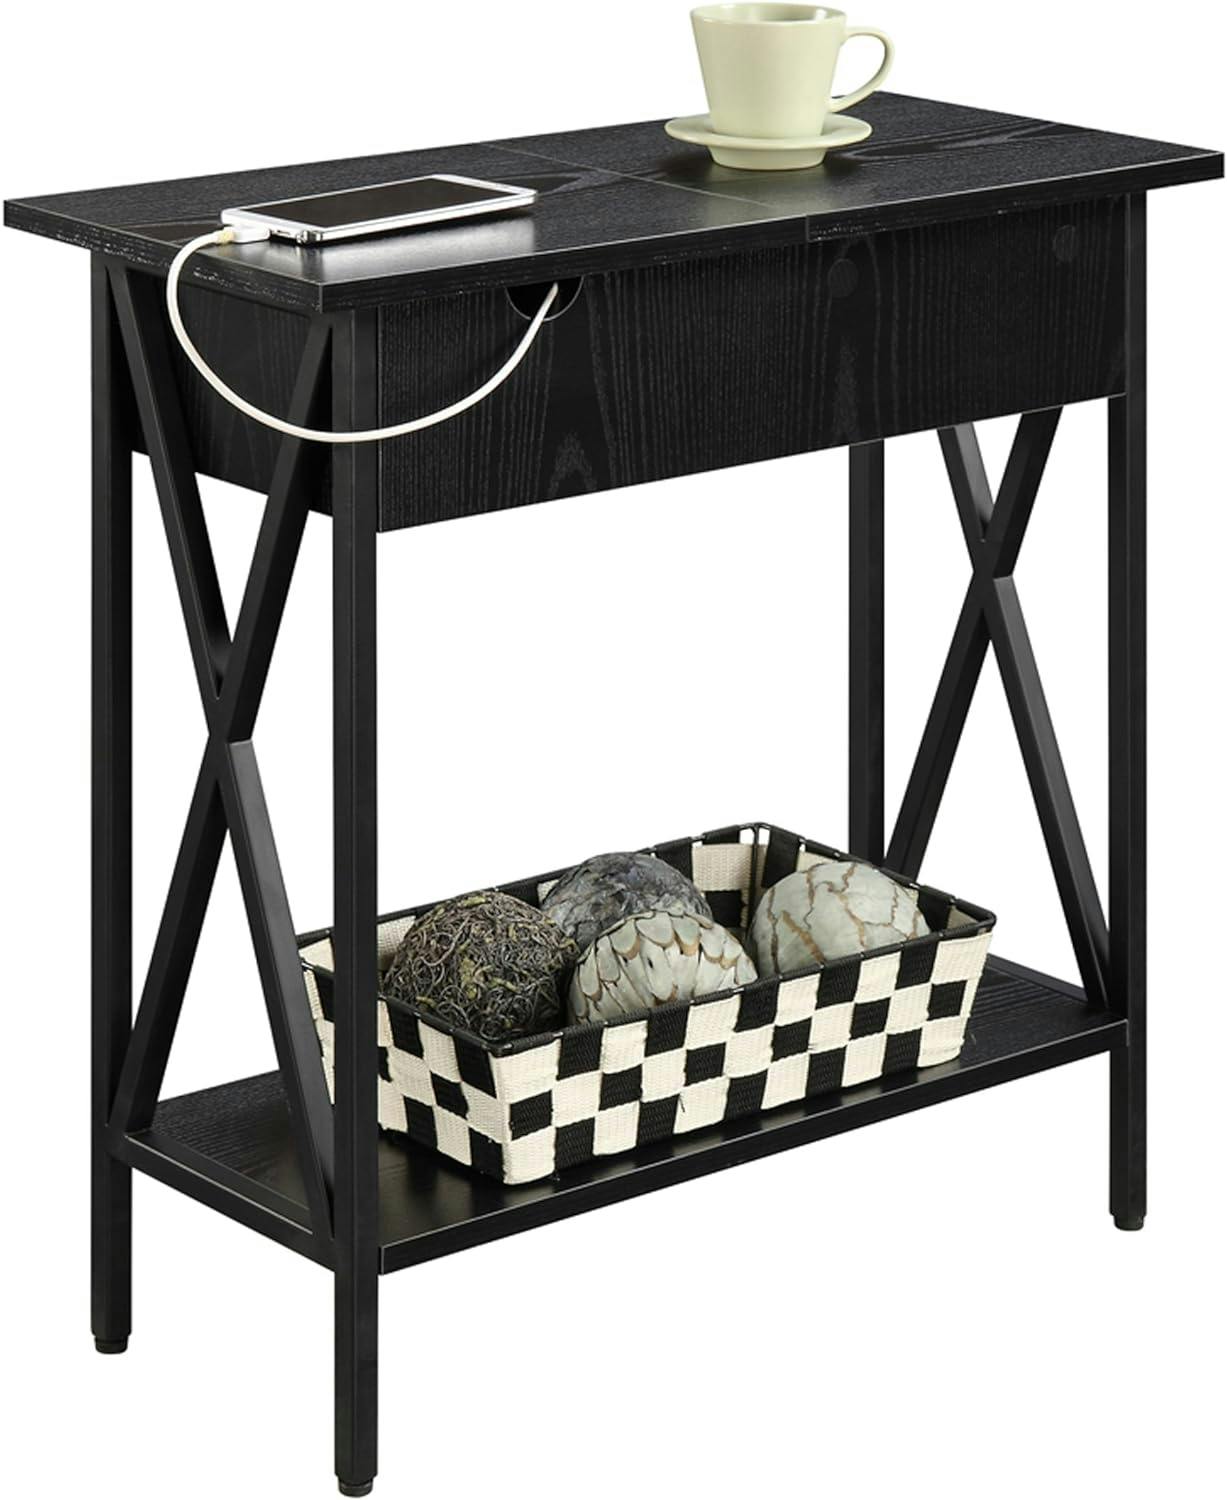 Tucson Black Wood and Metal Flip-Top End Table with Charging Station